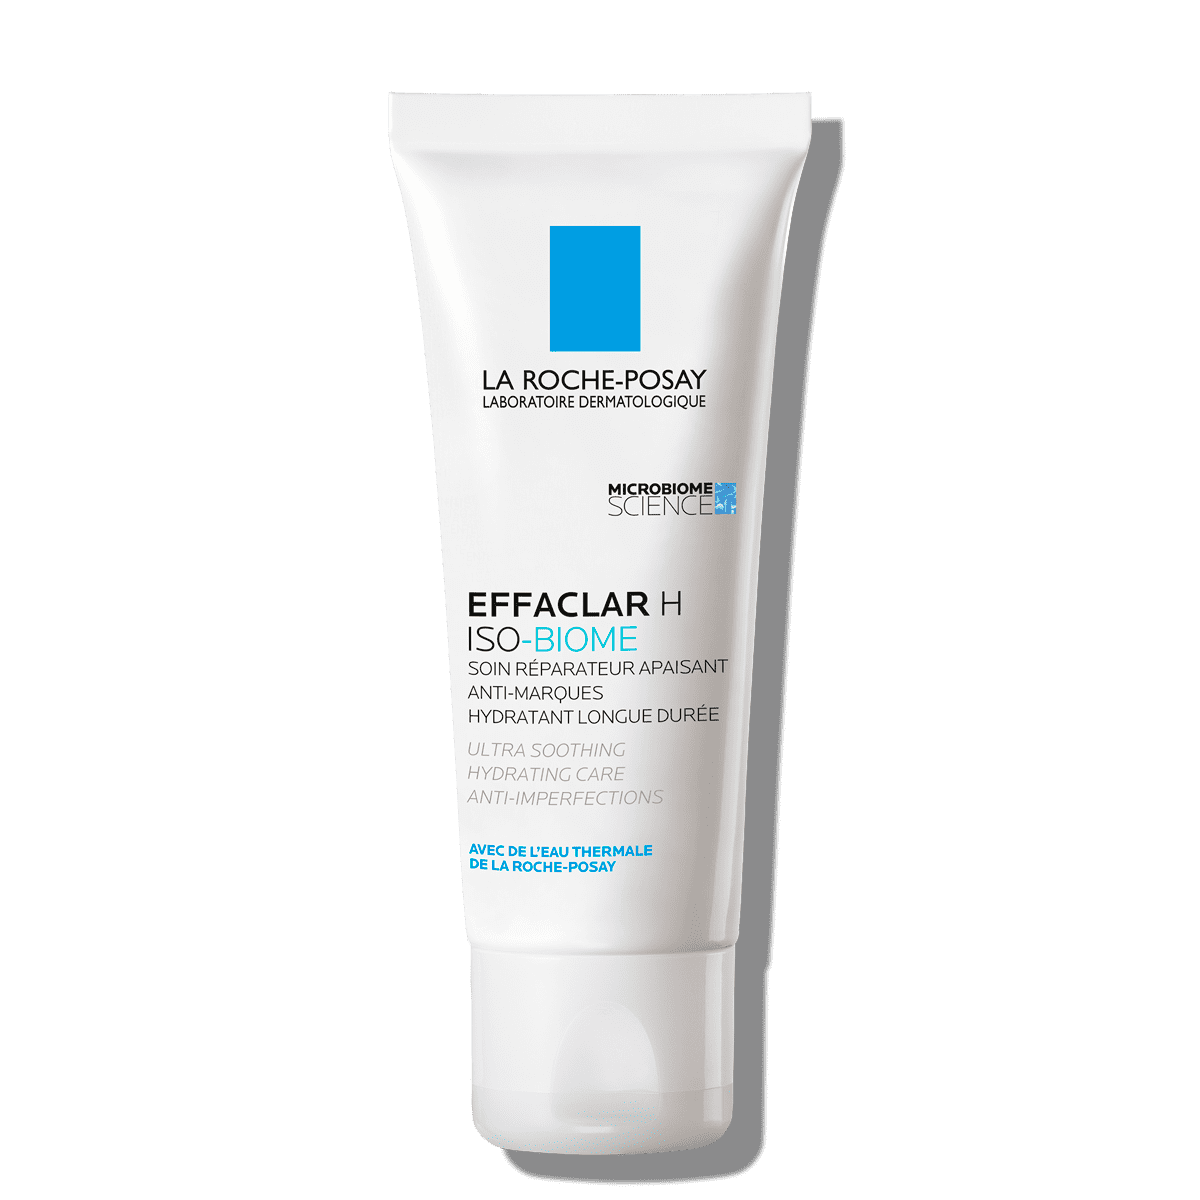 lrp_effaclar_h isobiome_40ml_pack-front